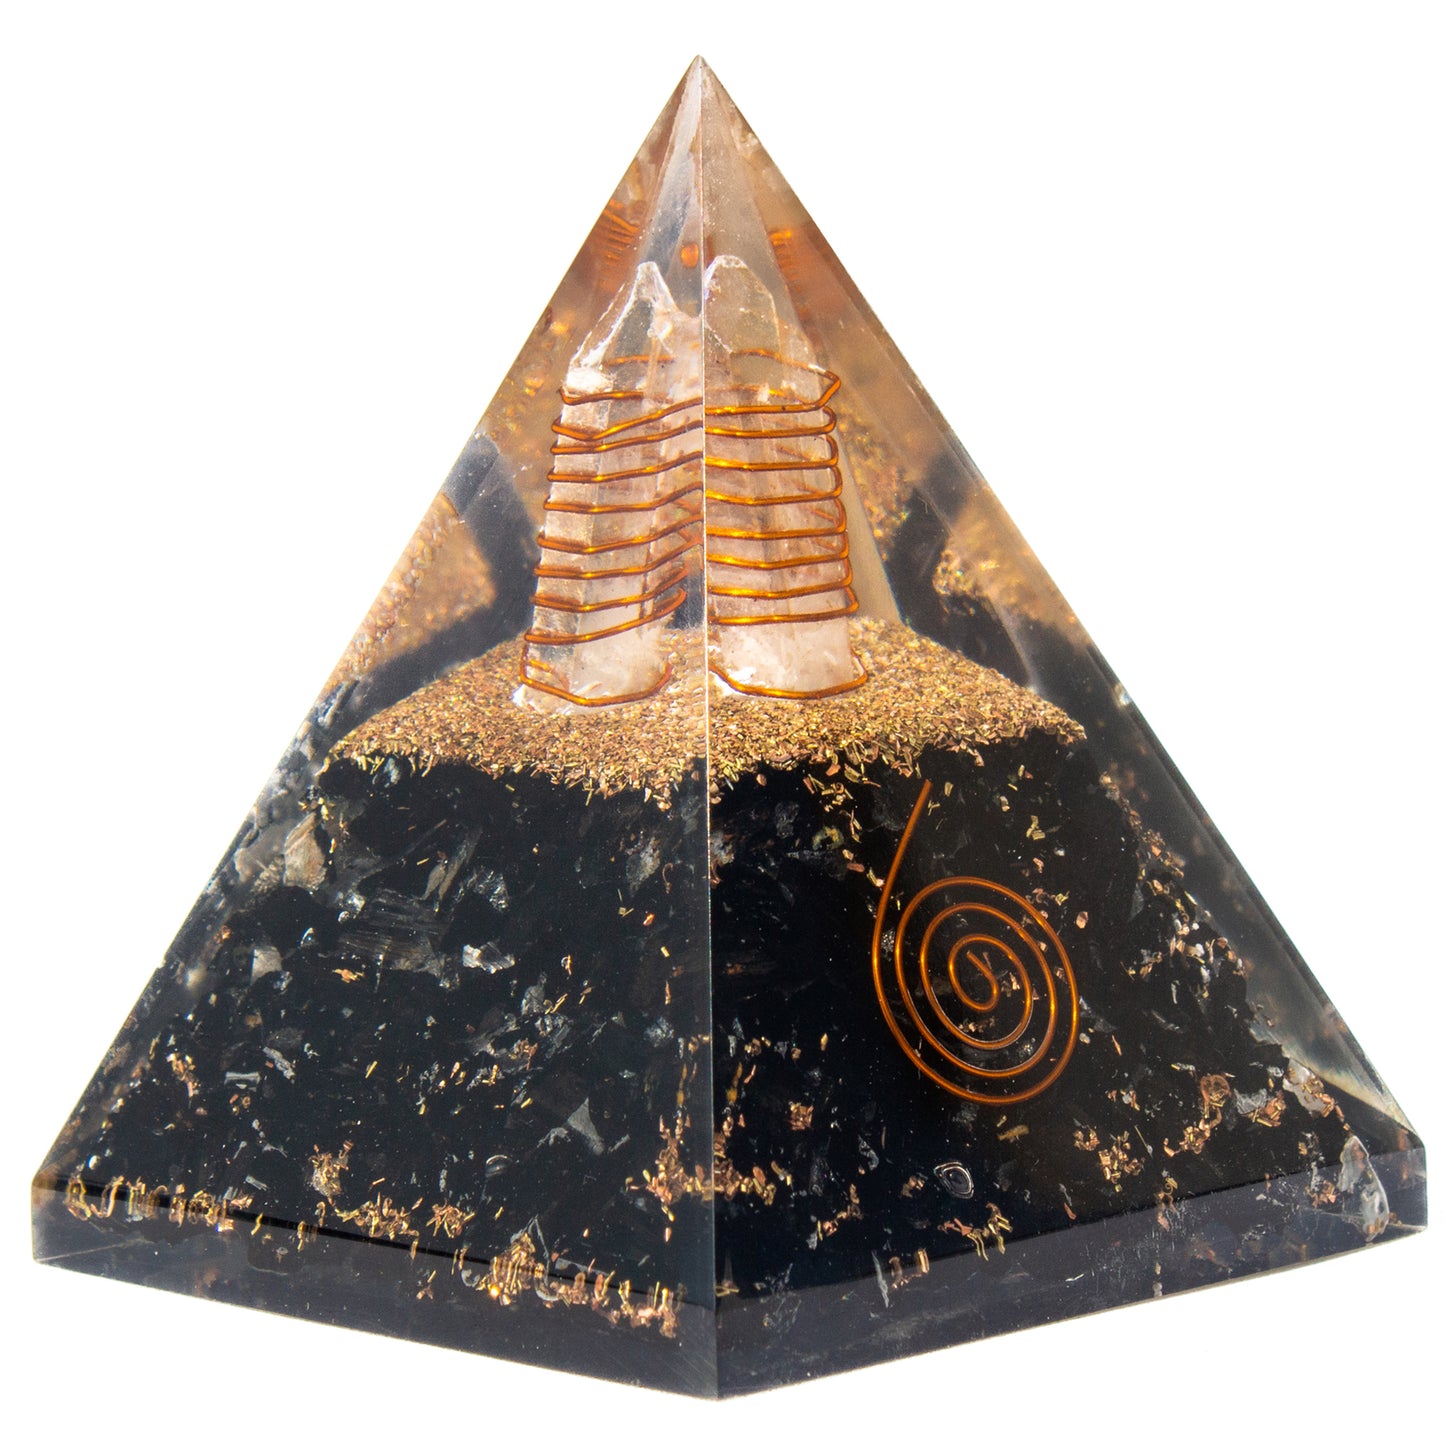 A Complete Guide to Orgonite Pyramid